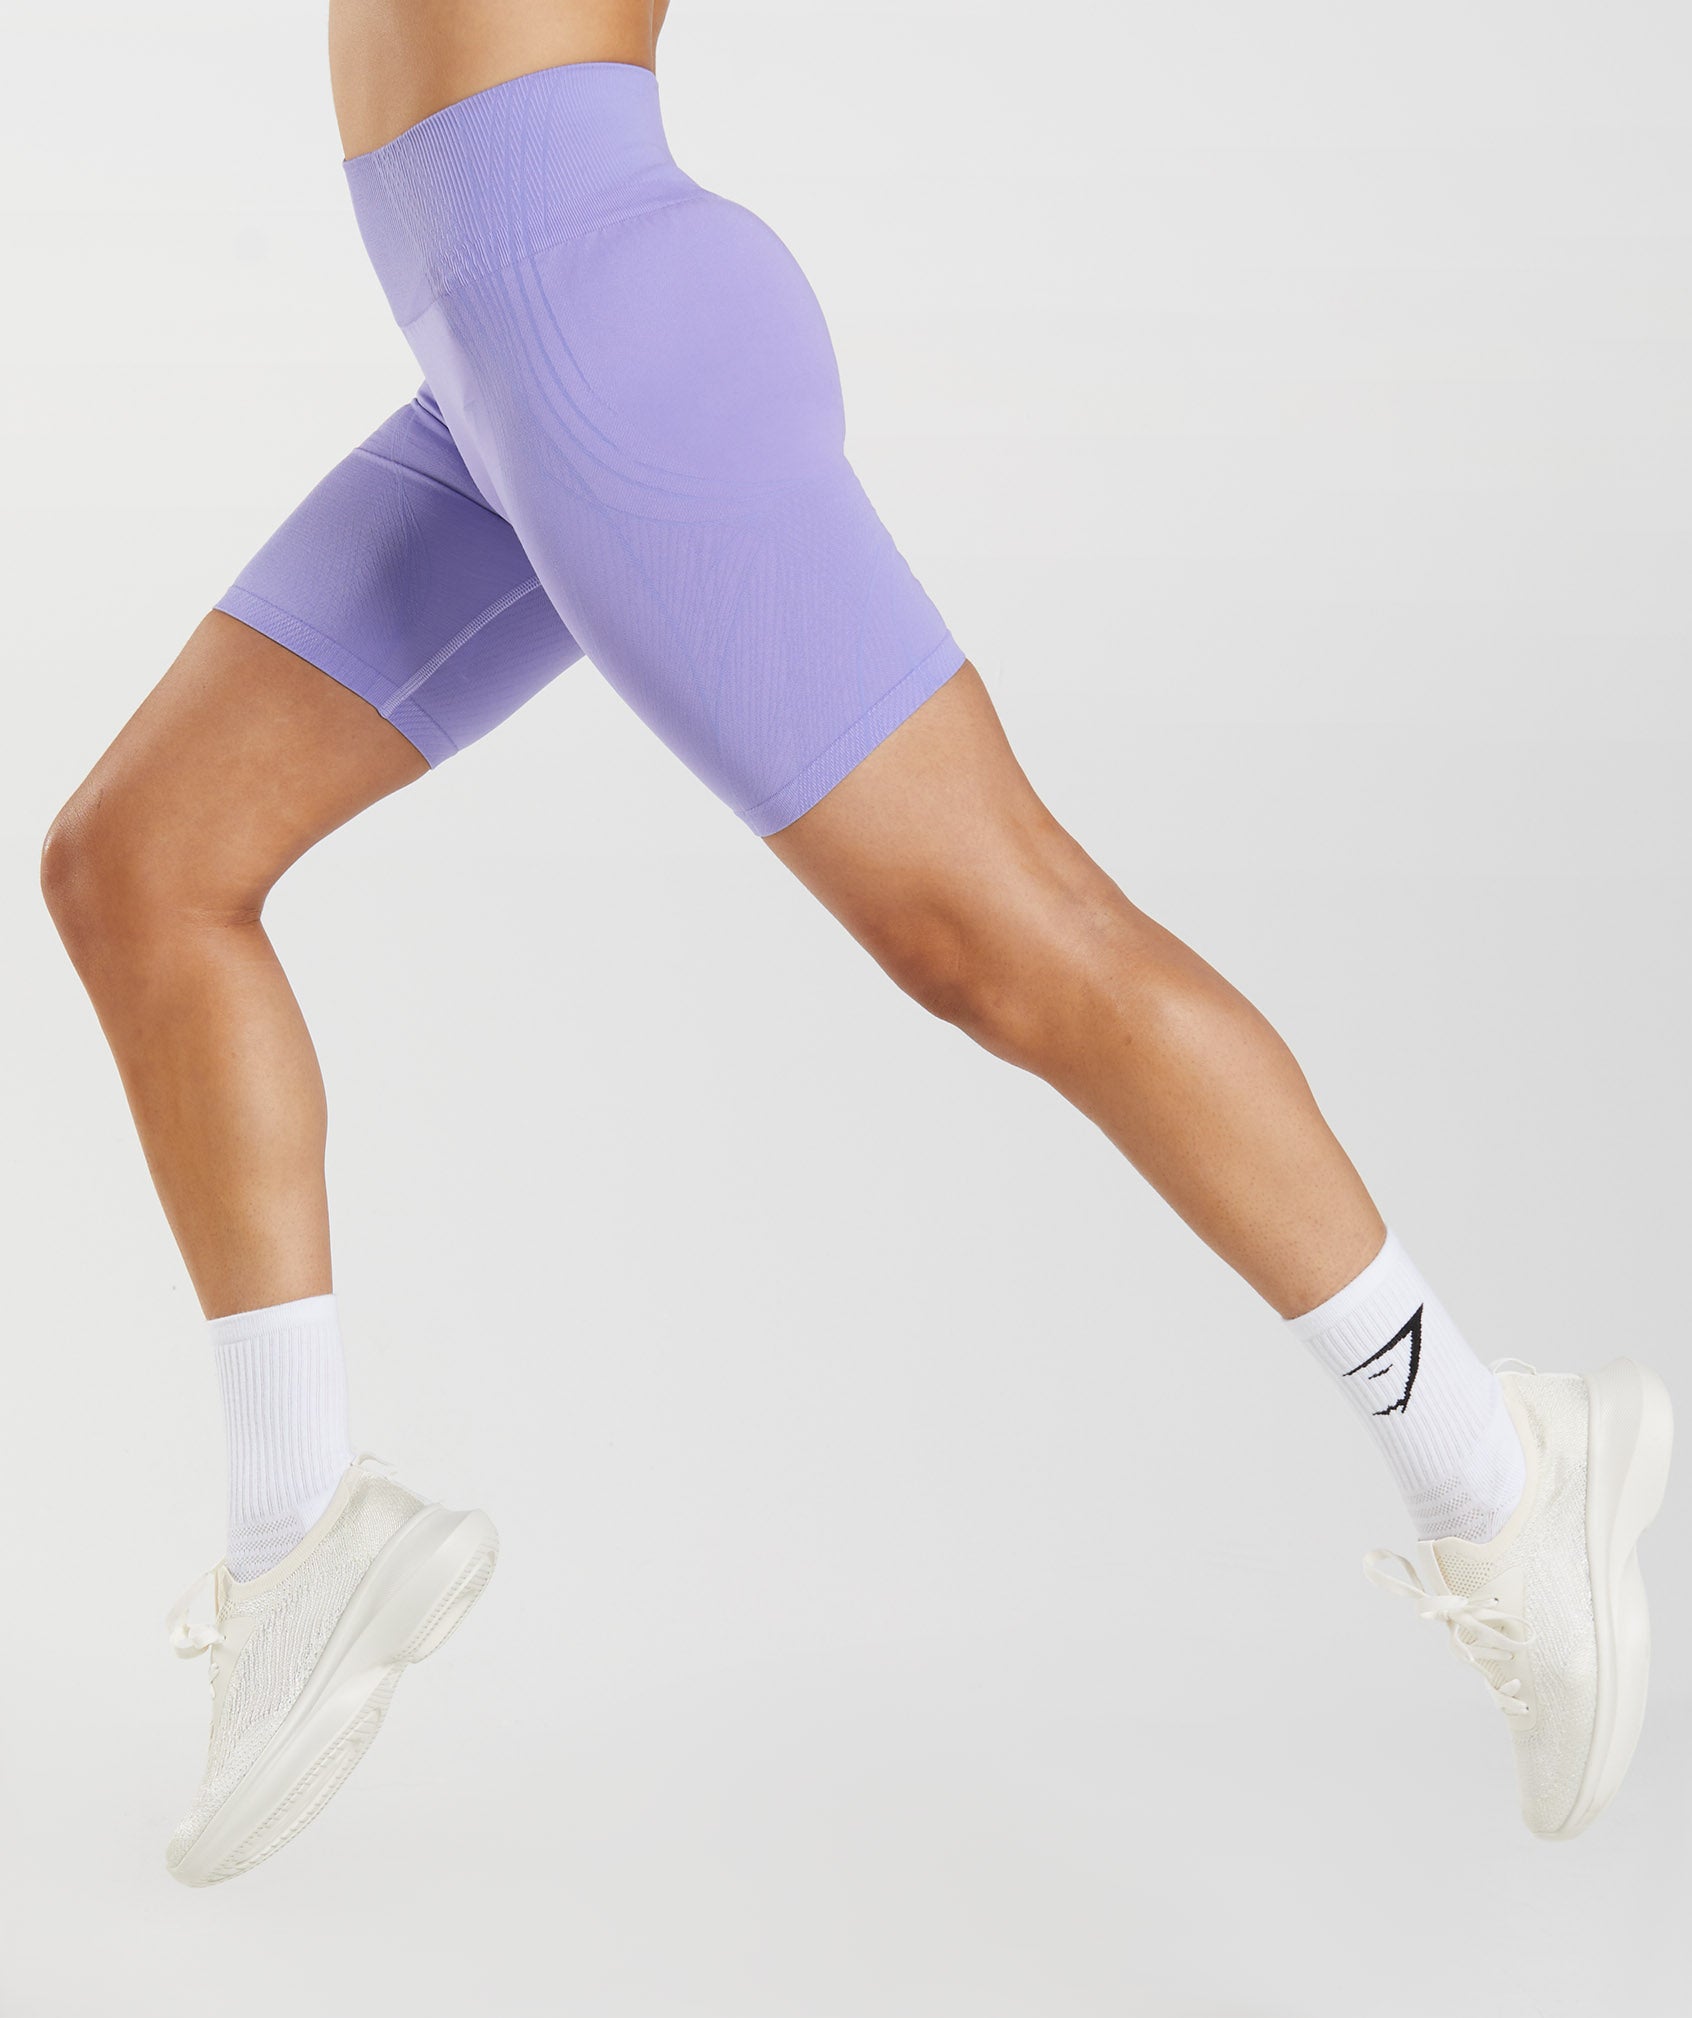 Apex Seamless Shorts in Digital Violet/Dusted Violet - view 3